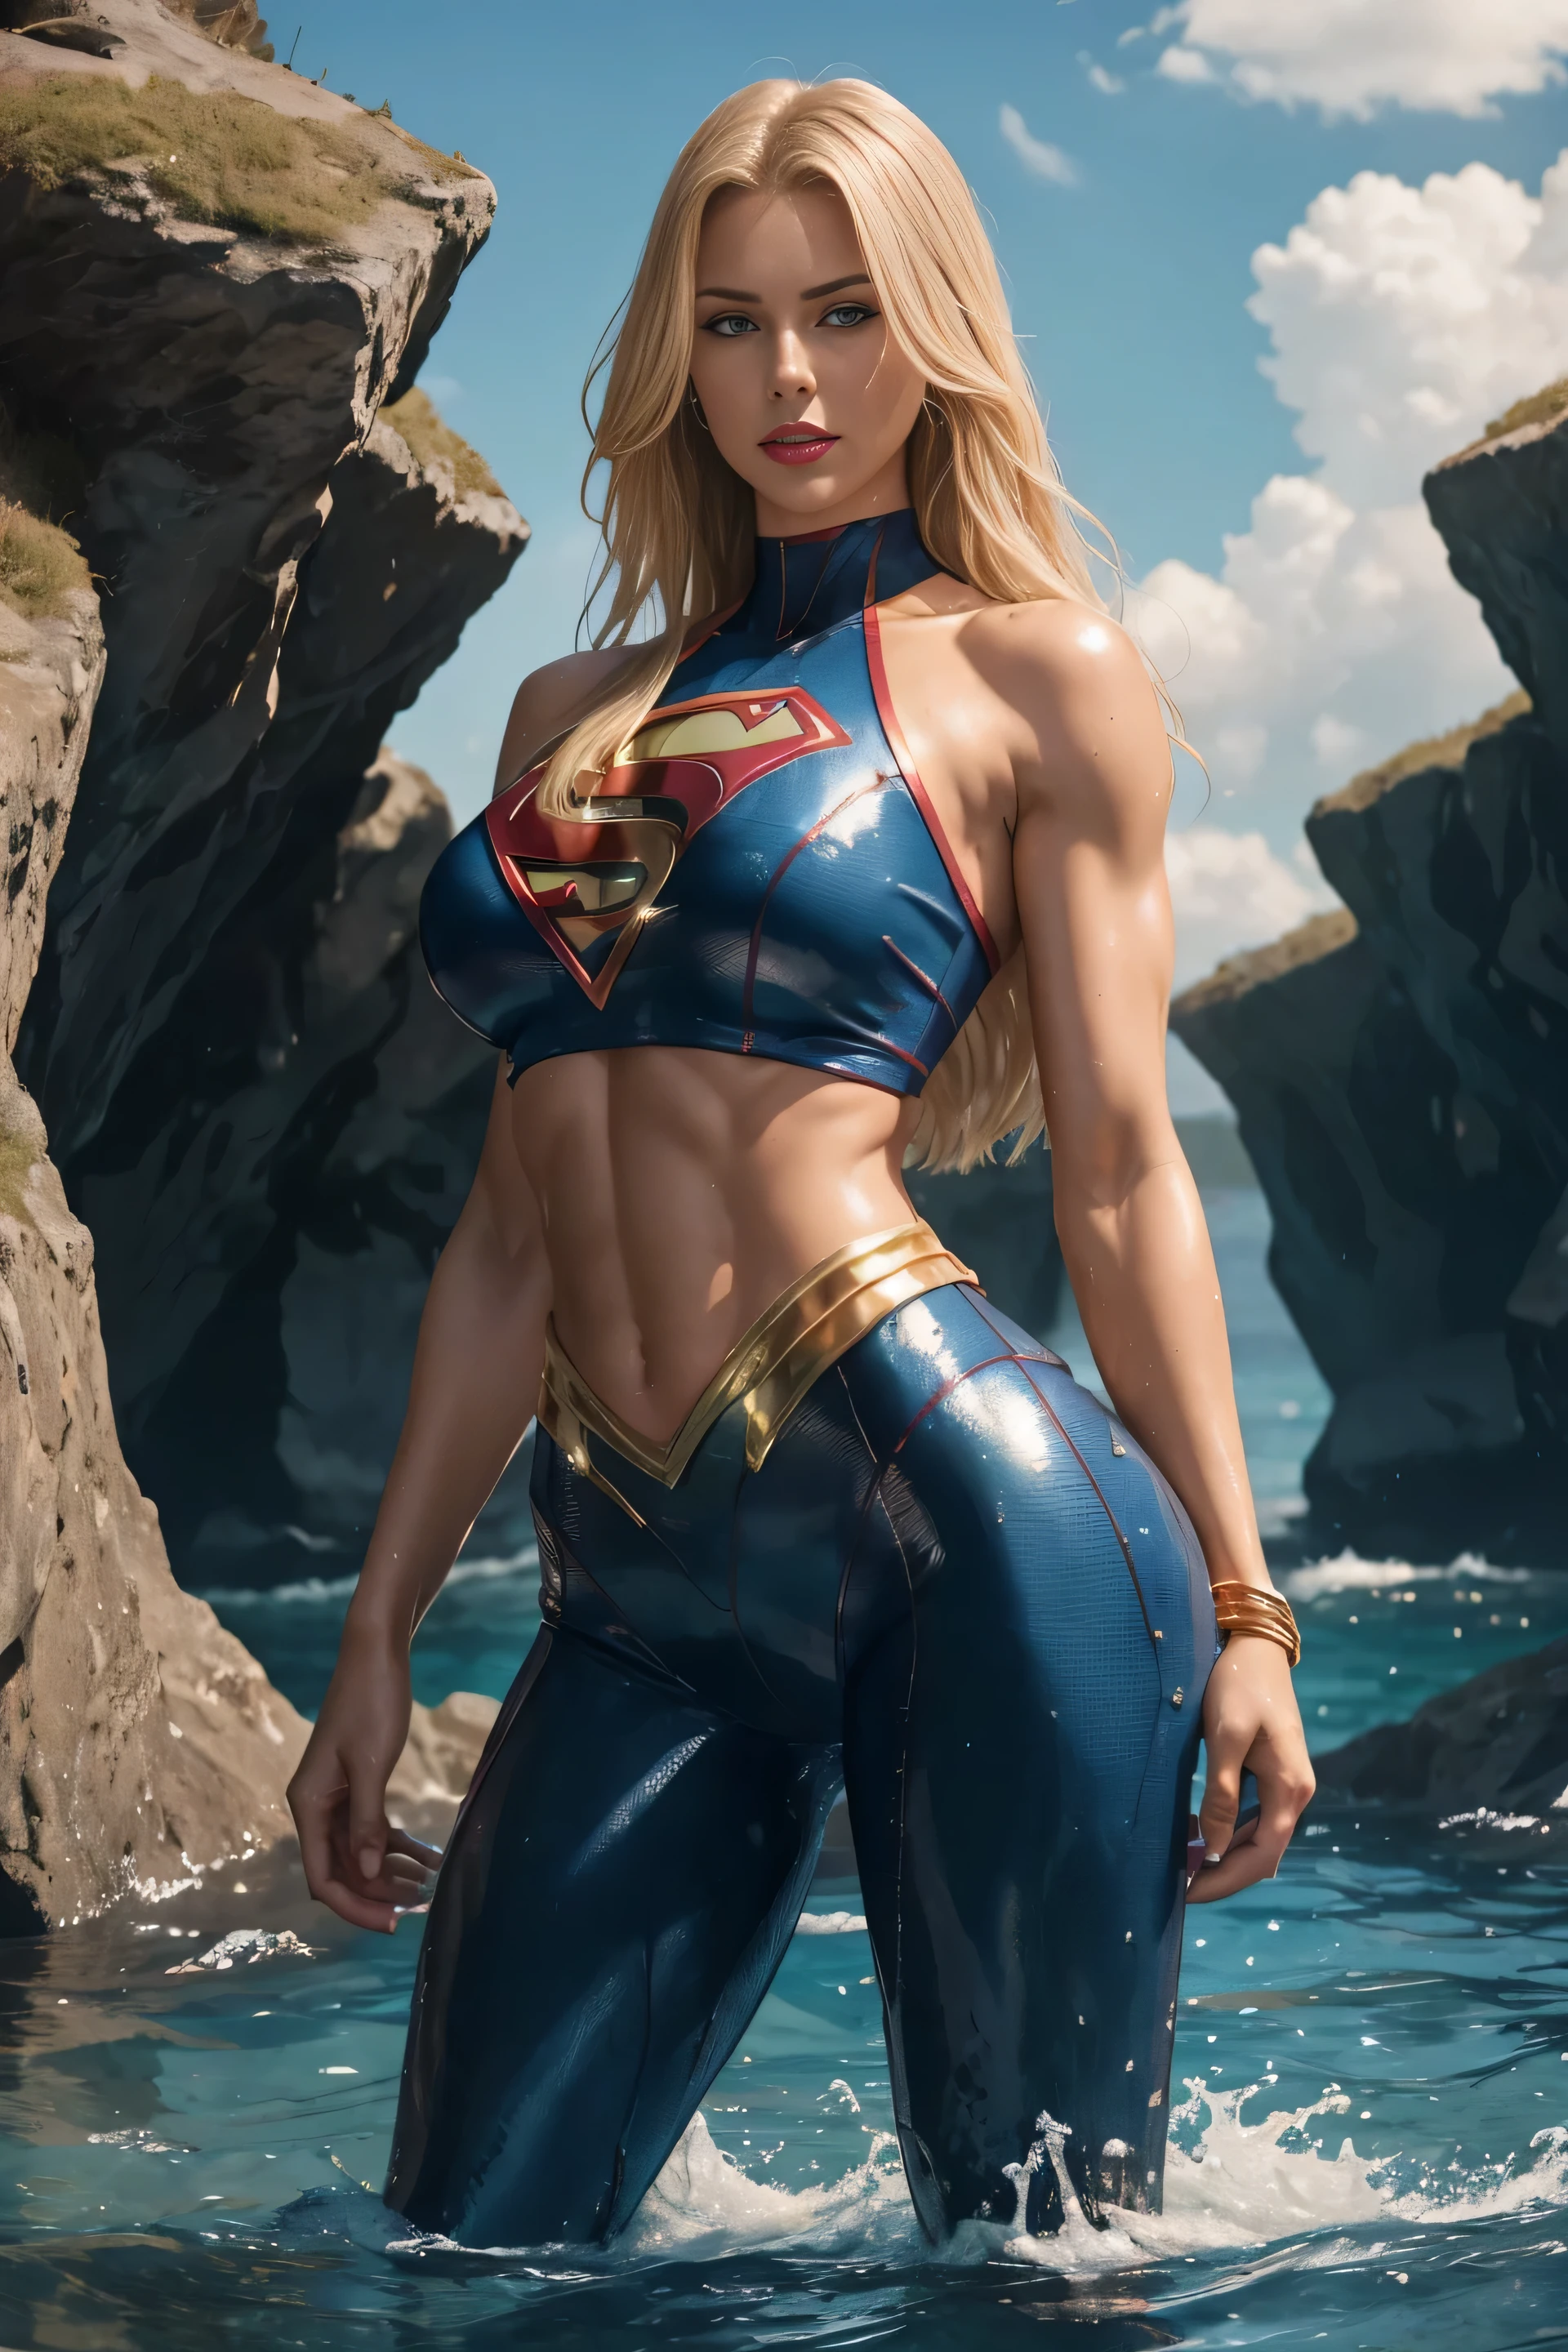 Full body shot seen from behind Sexy 45 years old mature, superheroine Supergirl long shaggy wet blonde hair falling on her long blonde shoulders, glowing black, eyes red lips muscular body large breast wears a transparent blue shiny elastic body-fitting wetsuit, plunging sleeveless top gold shoulder pads gold bracelets revealing abs midriff a Z symbol on her chest portrait photography by artgerm, in the style of realism, glistening skin, cartooncore, mangacore, natural lighting, Defined full lips. Muscular fitness feminine body standing in the water in the background is a huge terrifying water monster